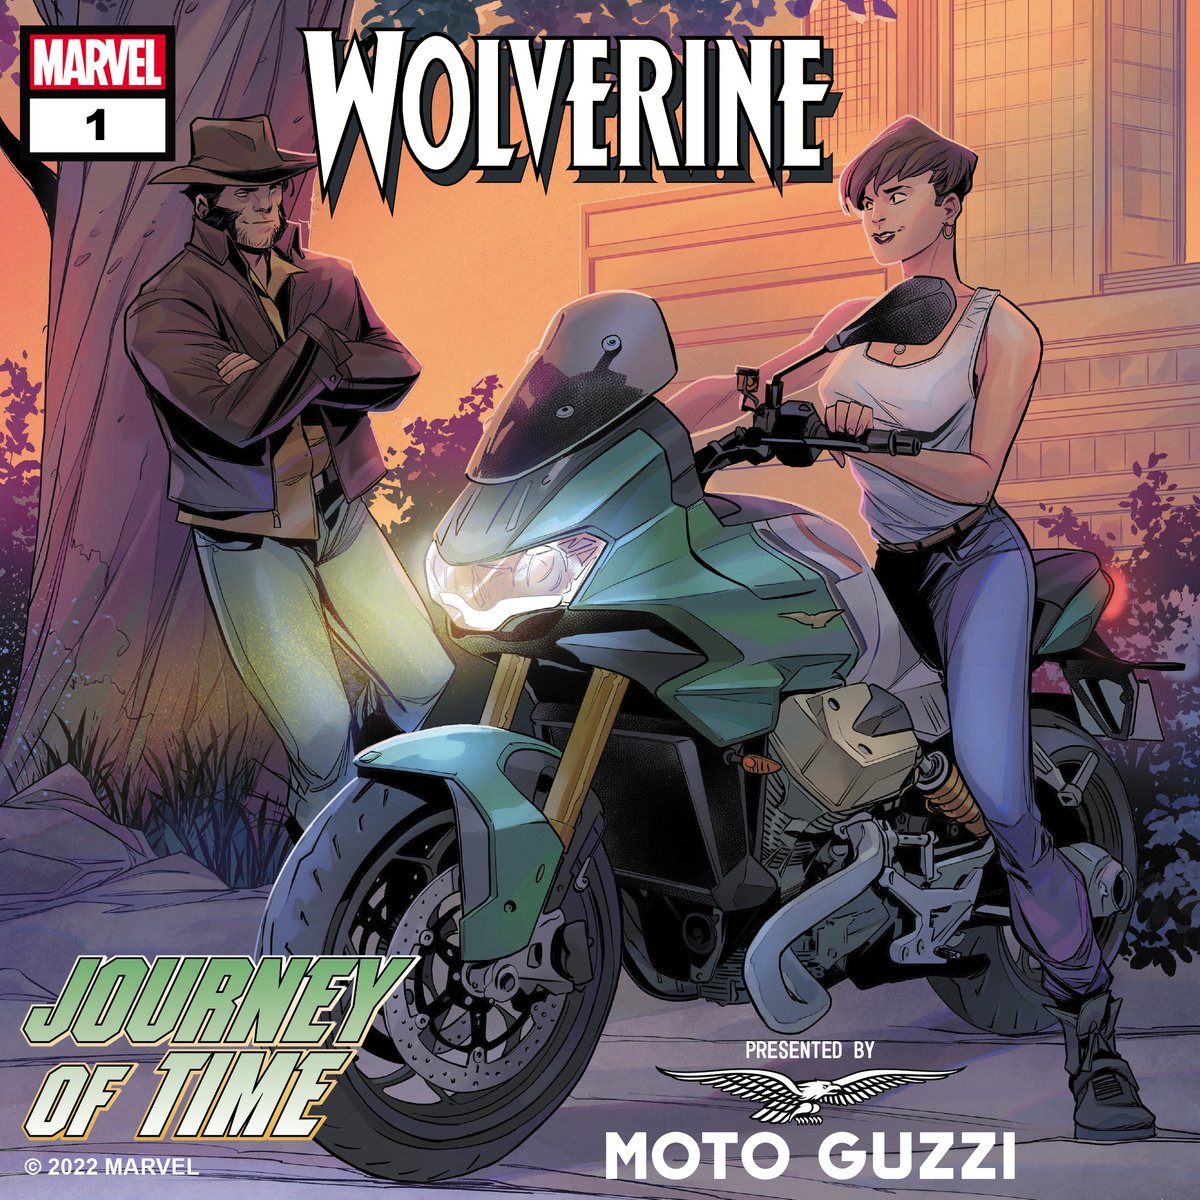 Follow Logan on a journey through time in a new ‘Wolverine’ comic presented by @motoguzziclub. Read now: bit.ly/3RMdPzX #ad